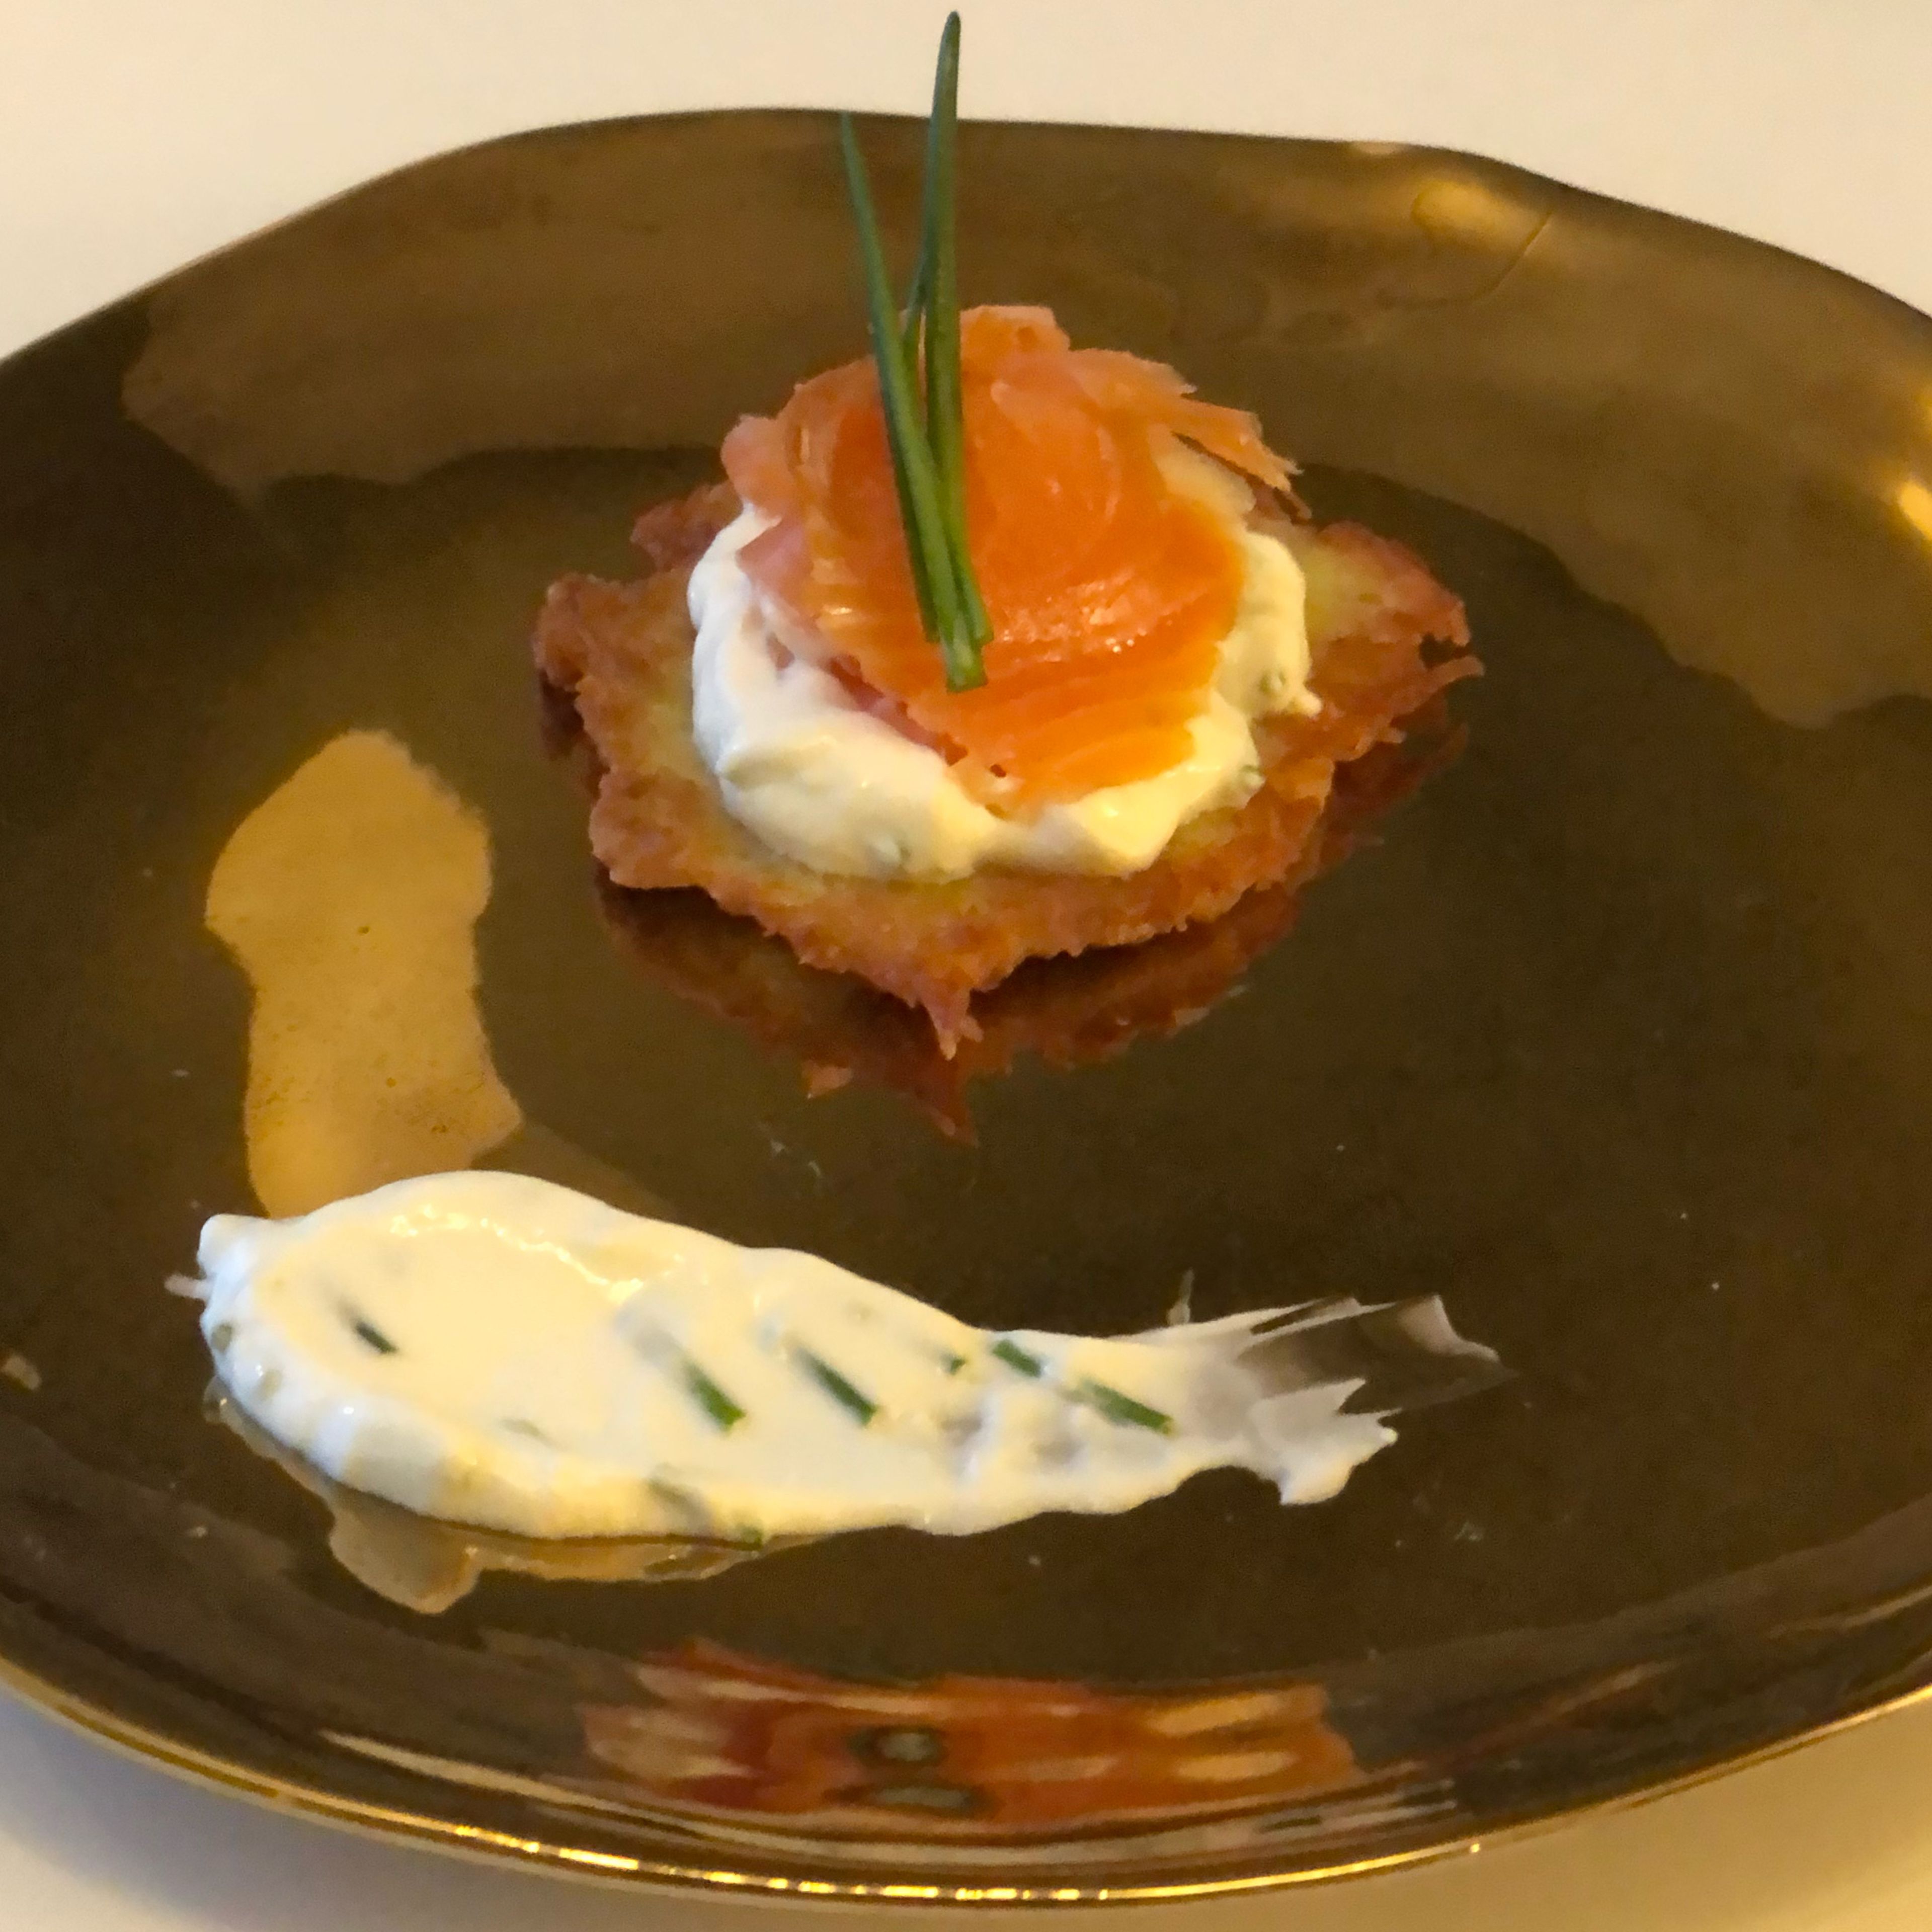 Place a rösti on a plate. Put on some sauce and finish of with some smoked salmon and chives.